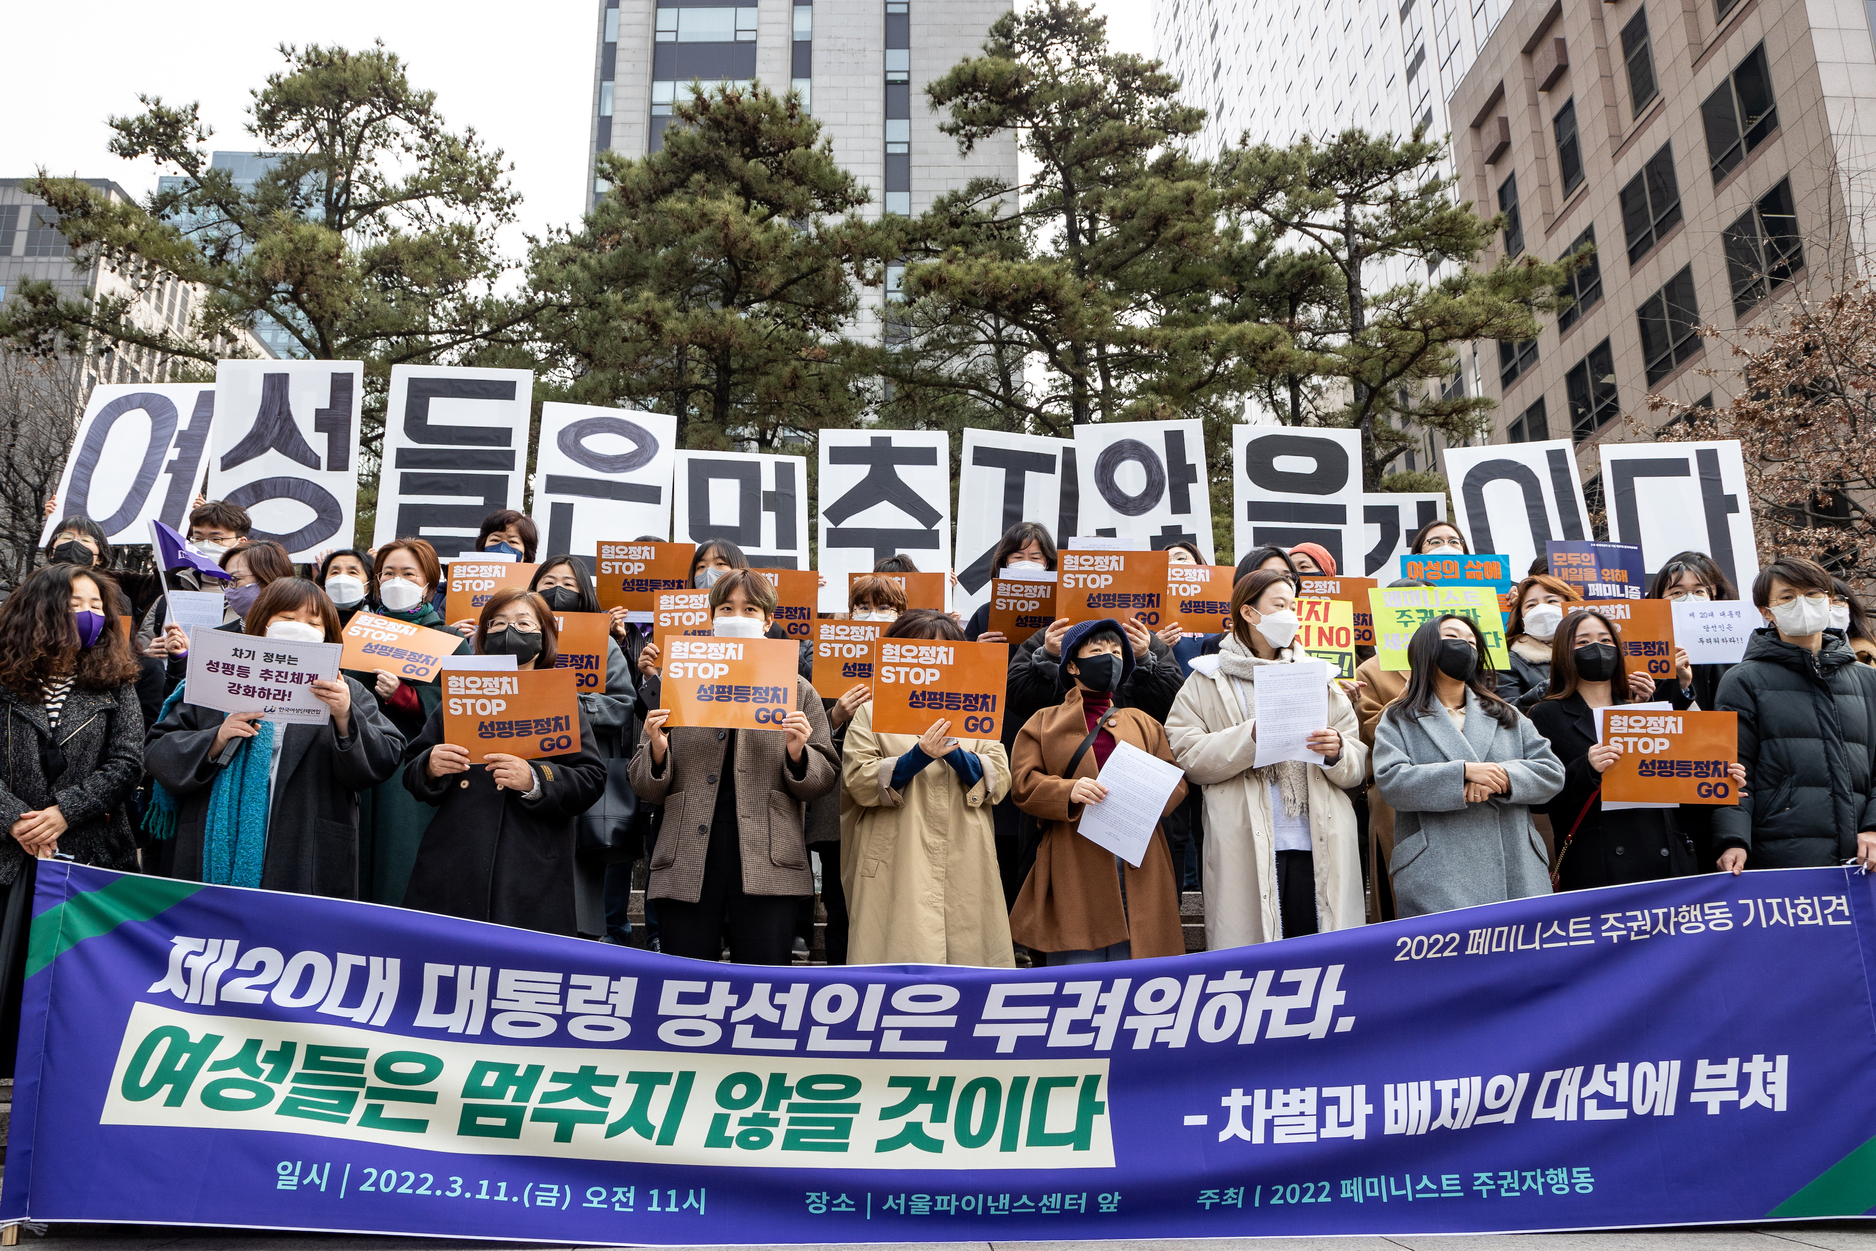 South Koreas misogyny problem East Asia Forum picture image photo